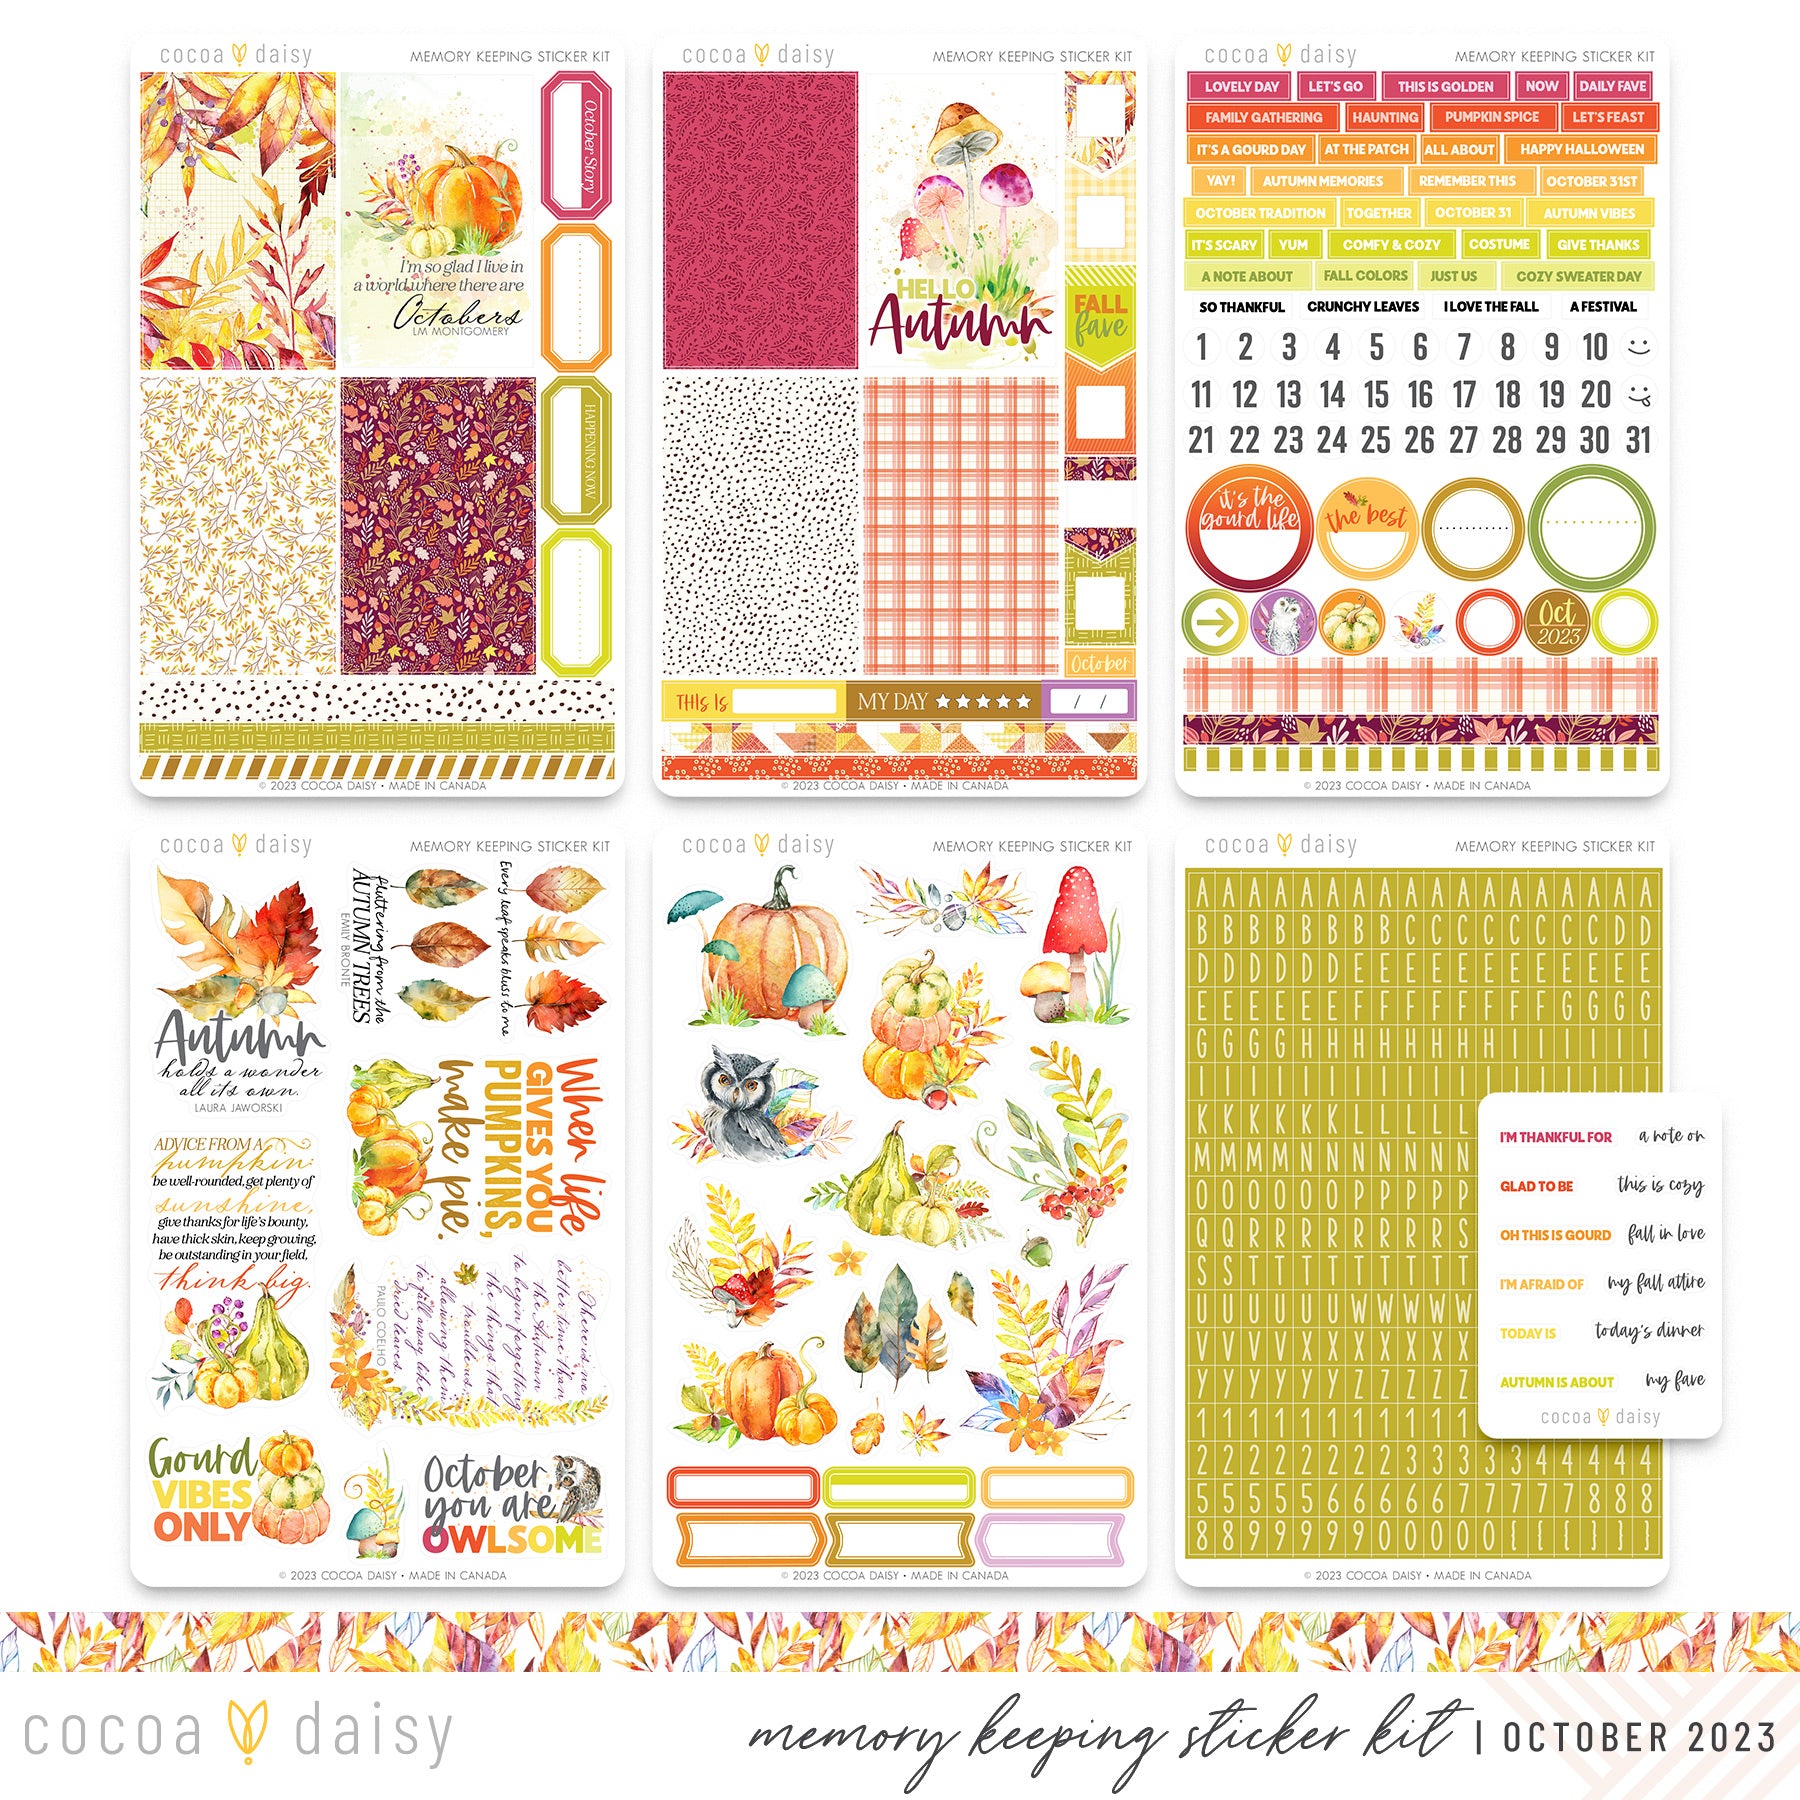 Autumn Whispers Memory Keeping Sticker Kit  October 2023